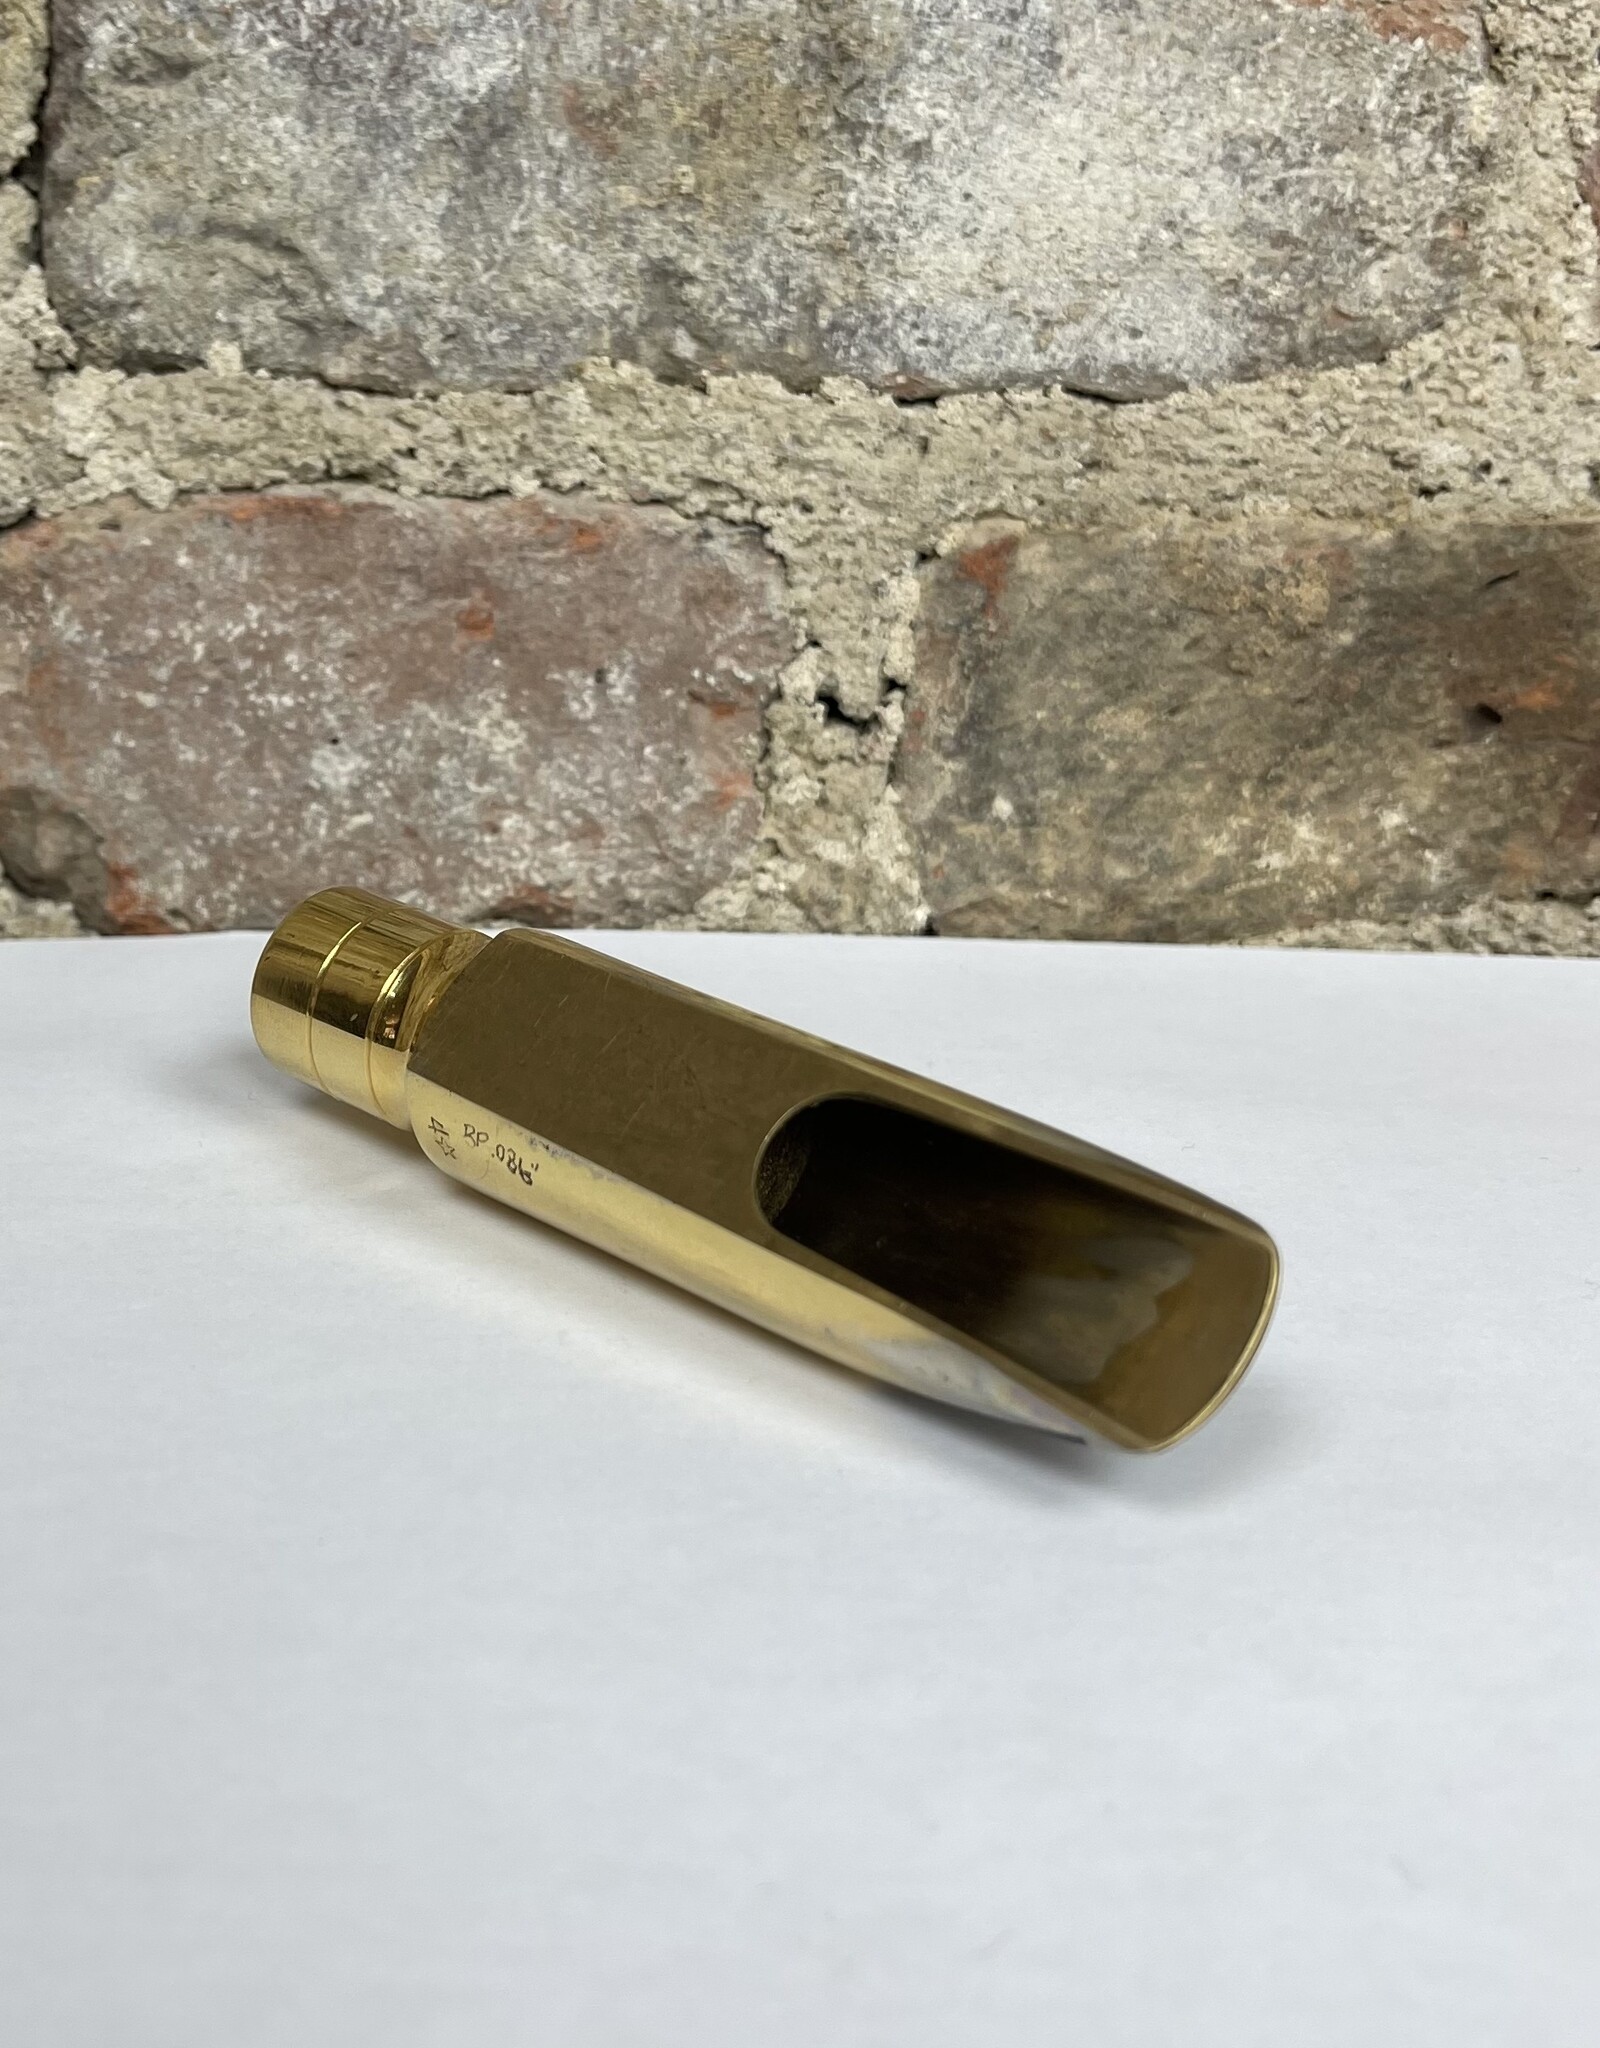 Otto Link Otto Link "NO USA" Metal Tenor Saxophone Mouthpiece Refaced by Brian Powell (.086")